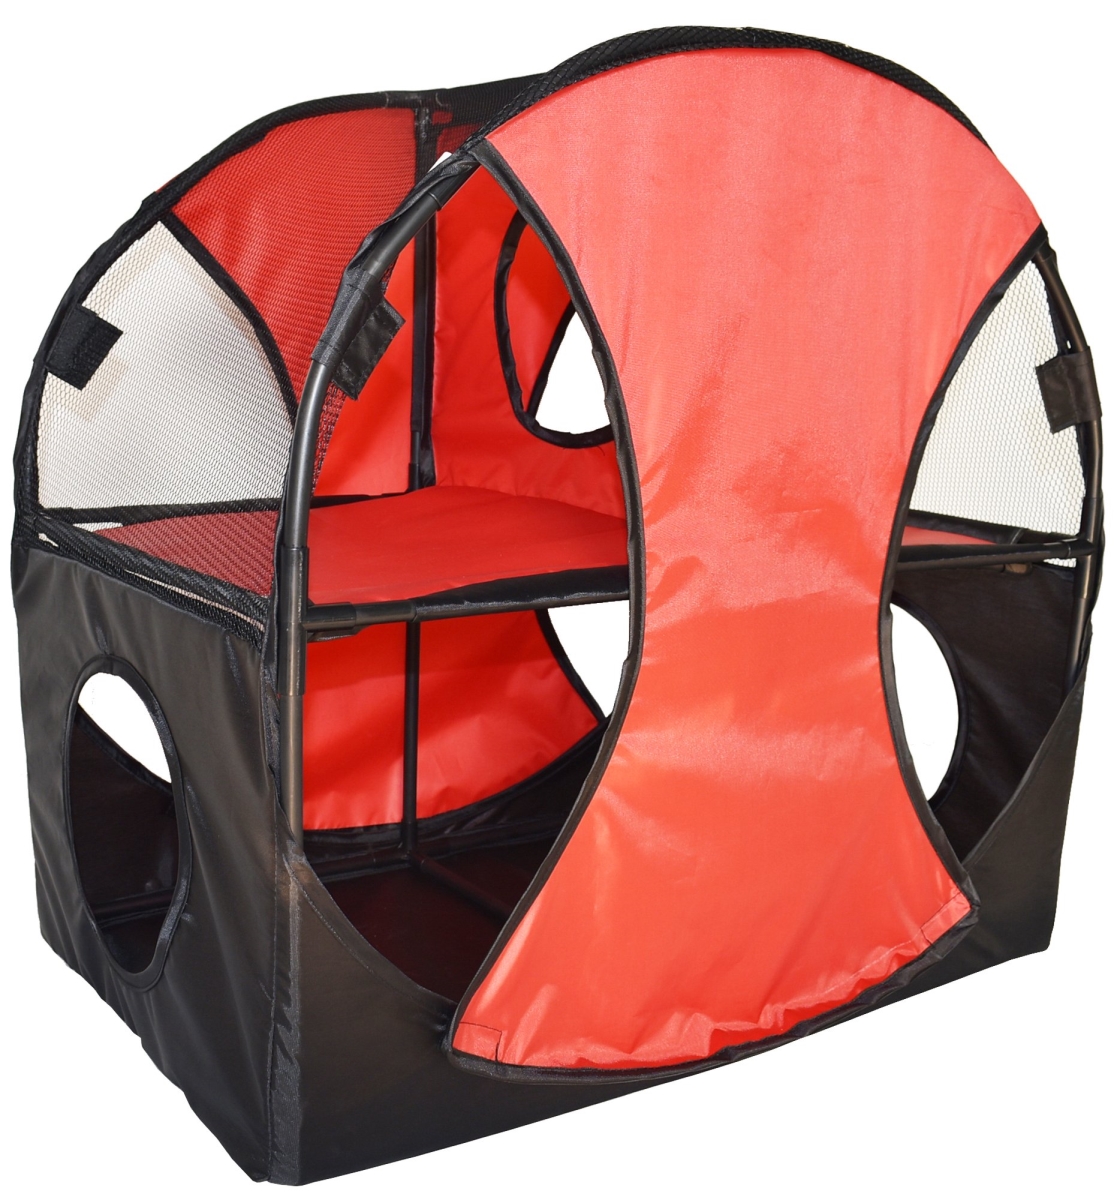 Picture of Pet Life PTT7RDBK Kitty Play Pet Cat House, Red & Black - One Size